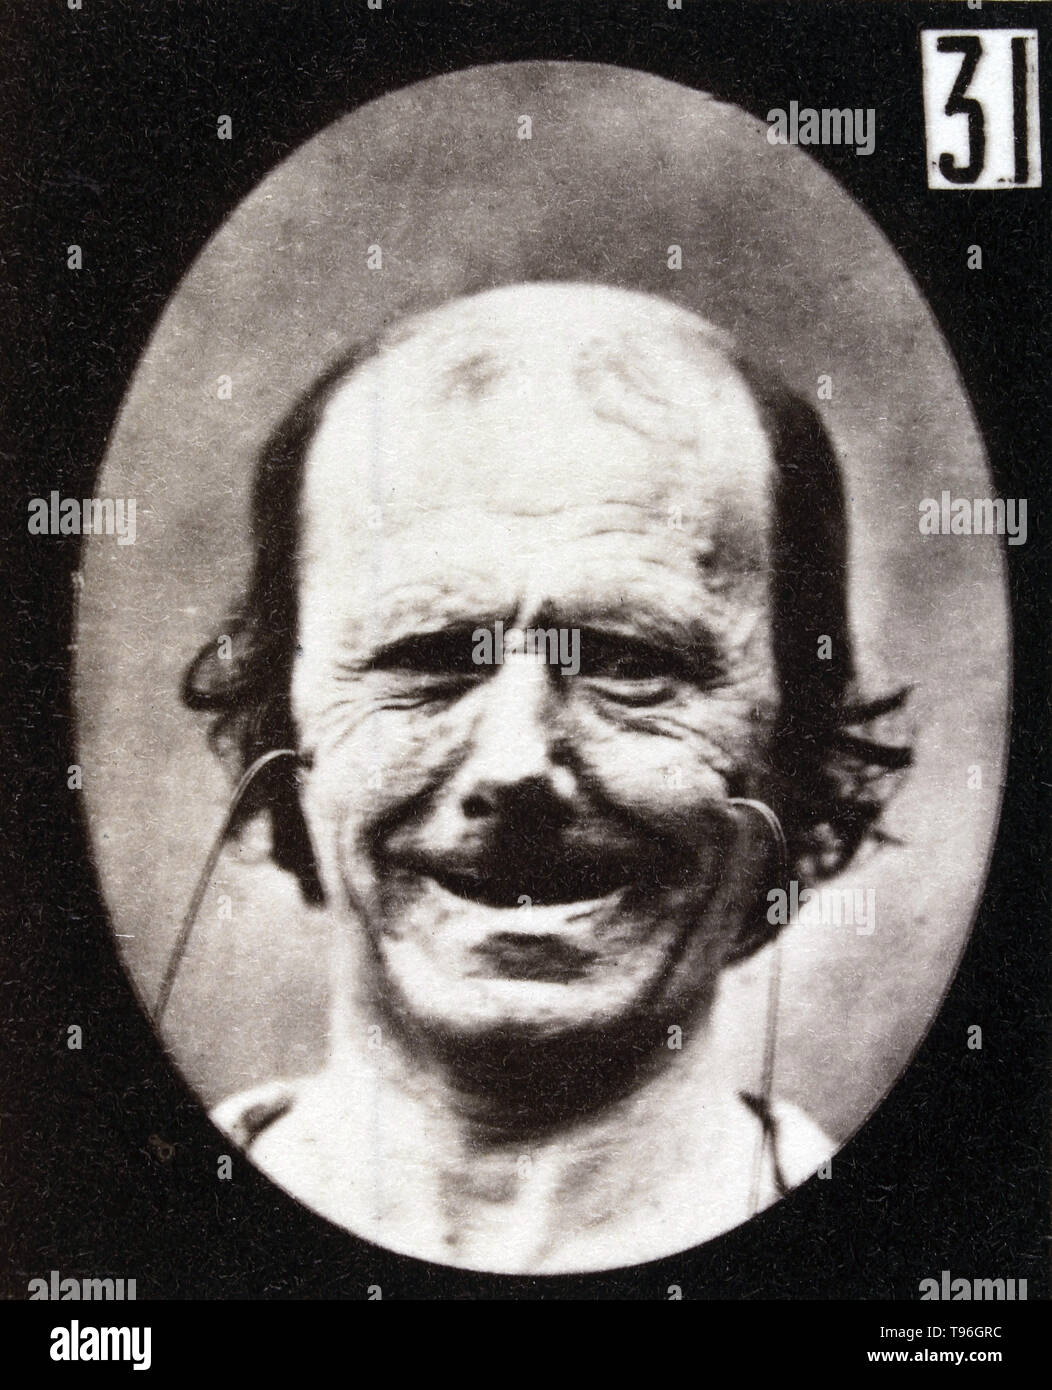 The facial expression of false laughter on the human face being induced by electrical currents. Guillaume-Benjamin-Amand Duchenne de Boulogne (September 17, 1806 - September 15, 1875) was a French neurologist who advanced the science of electrophysiology. Influenced by the beliefs of physiognomy, Duchenne wanted to determine how the muscles in the human face produce facial expressions which he believed to be directly linked to the soul of man. Stock Photo